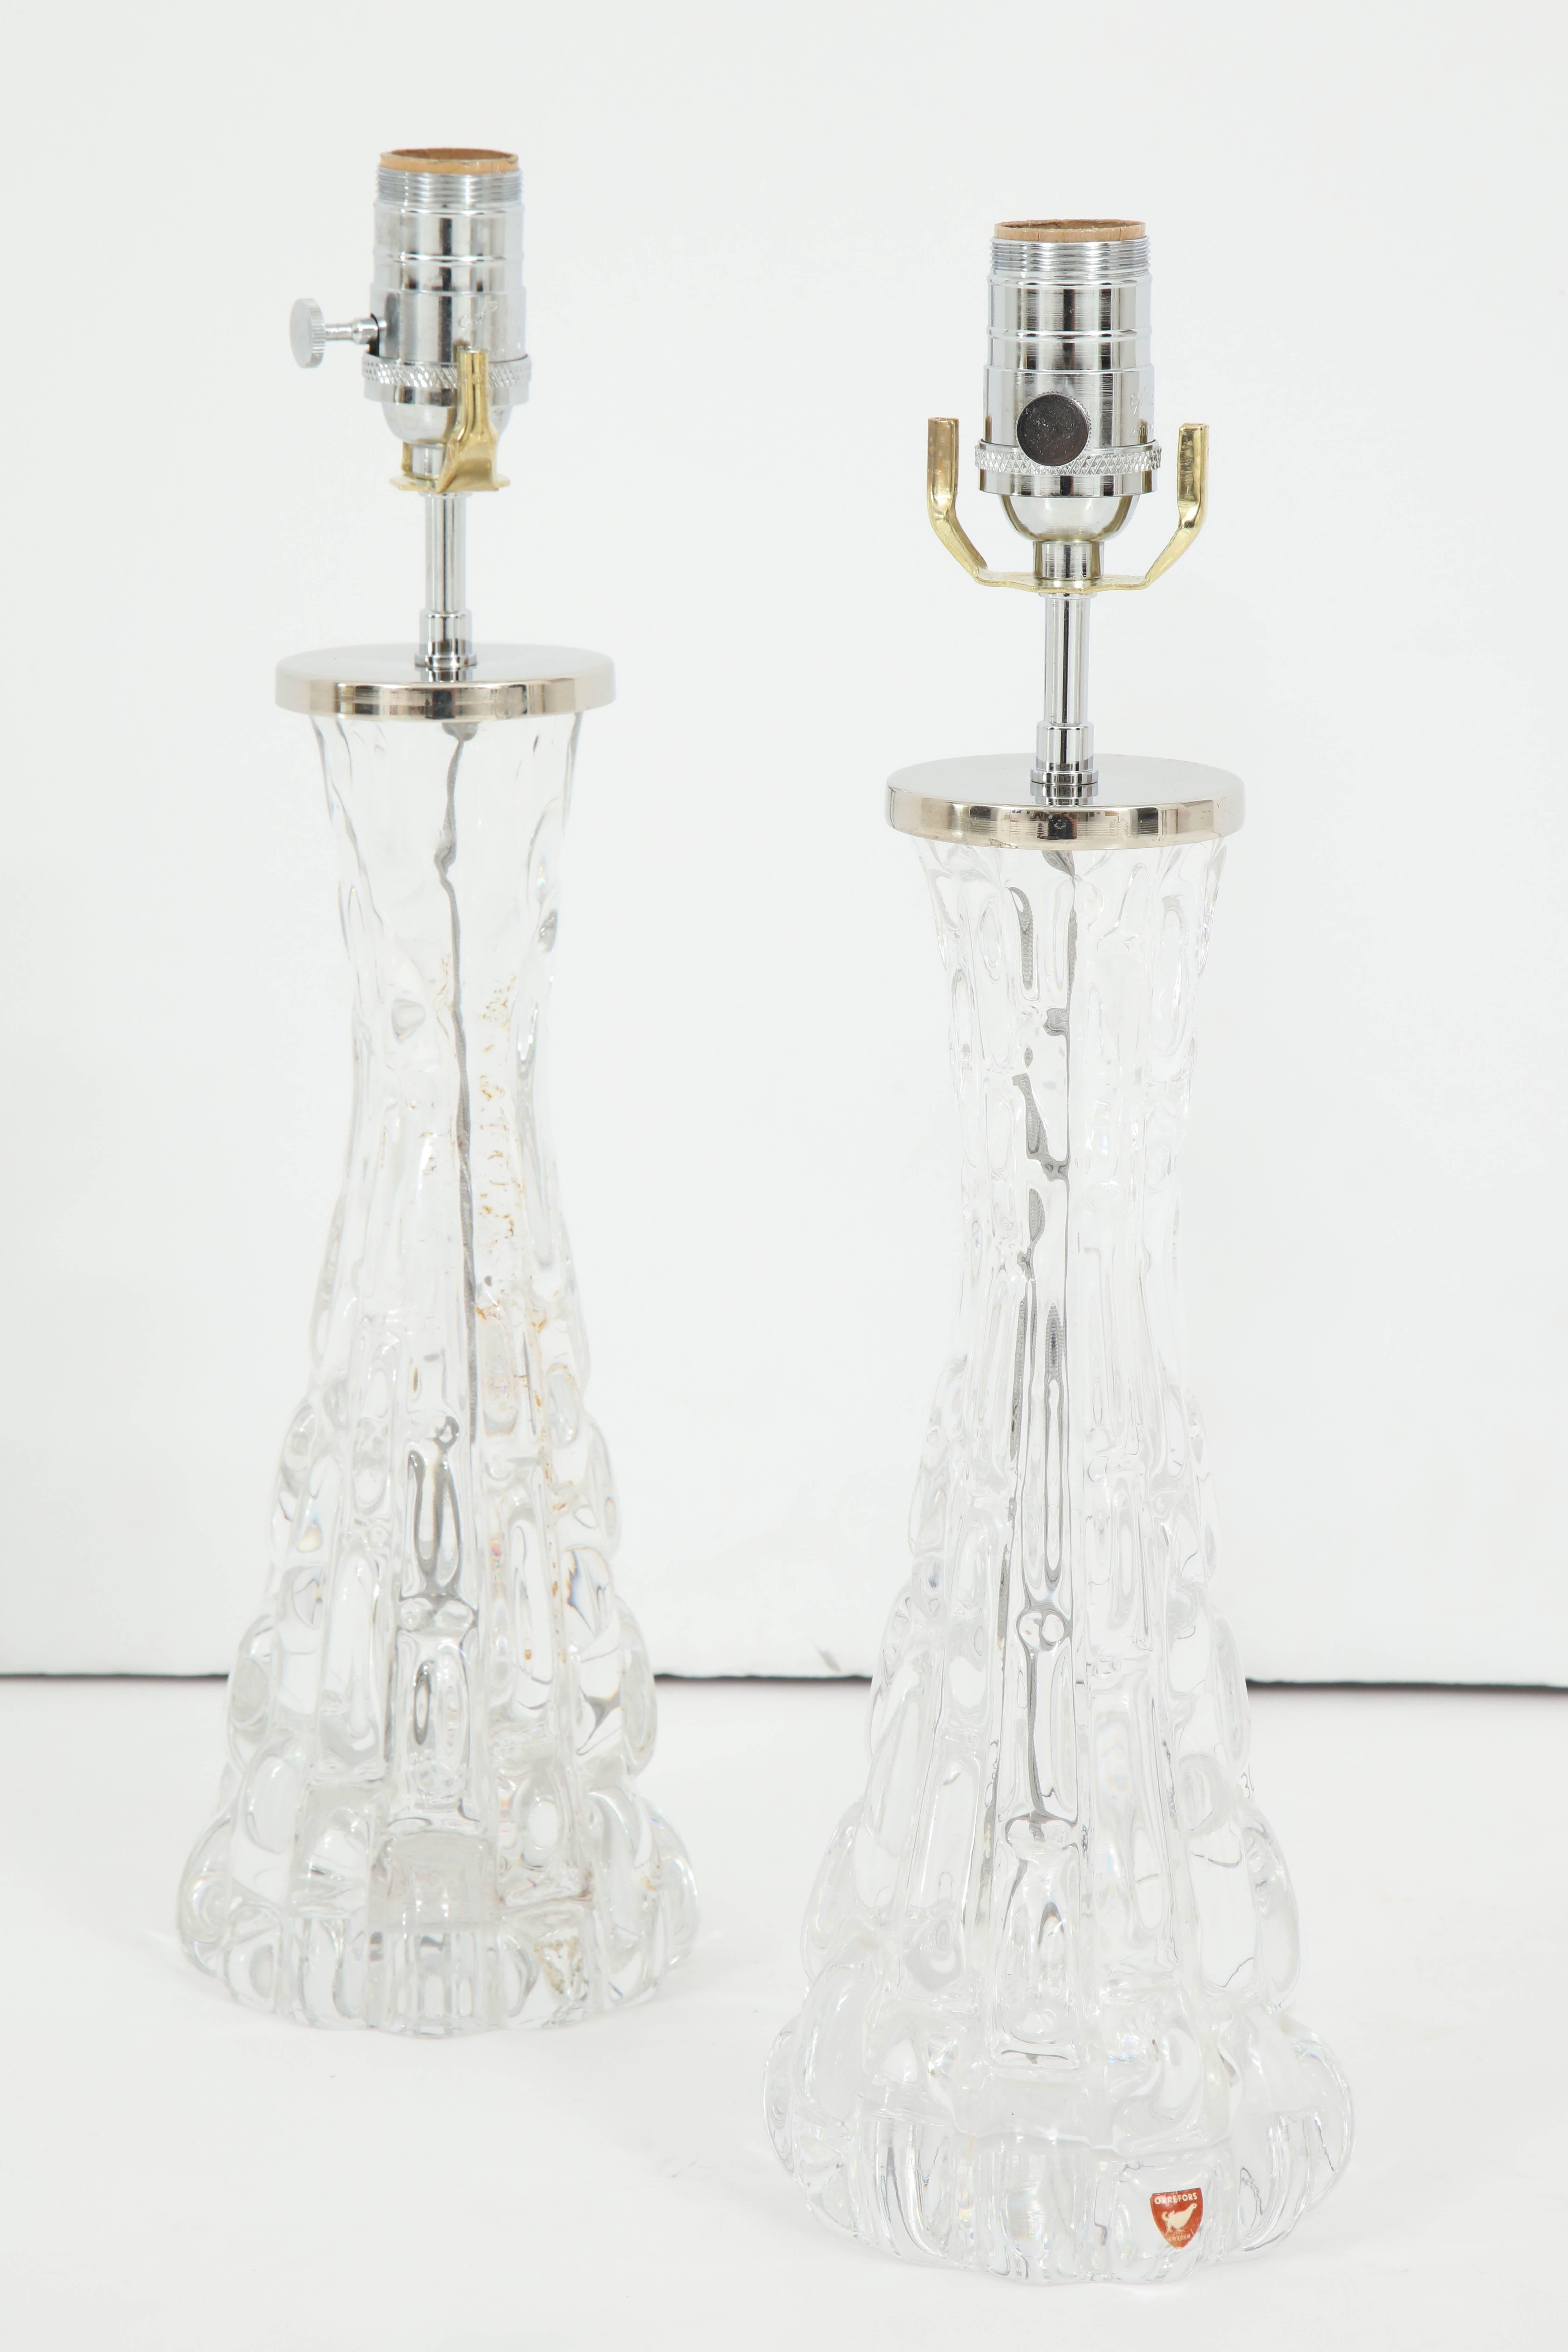 These stunning clear lamps have a sculptural quality about them. Created by Orrefors Crystal, the lamps have an hourglass form, with a textured appearance, almost like ice. They have been recently re-wired for use in the US, and have fabric cords.